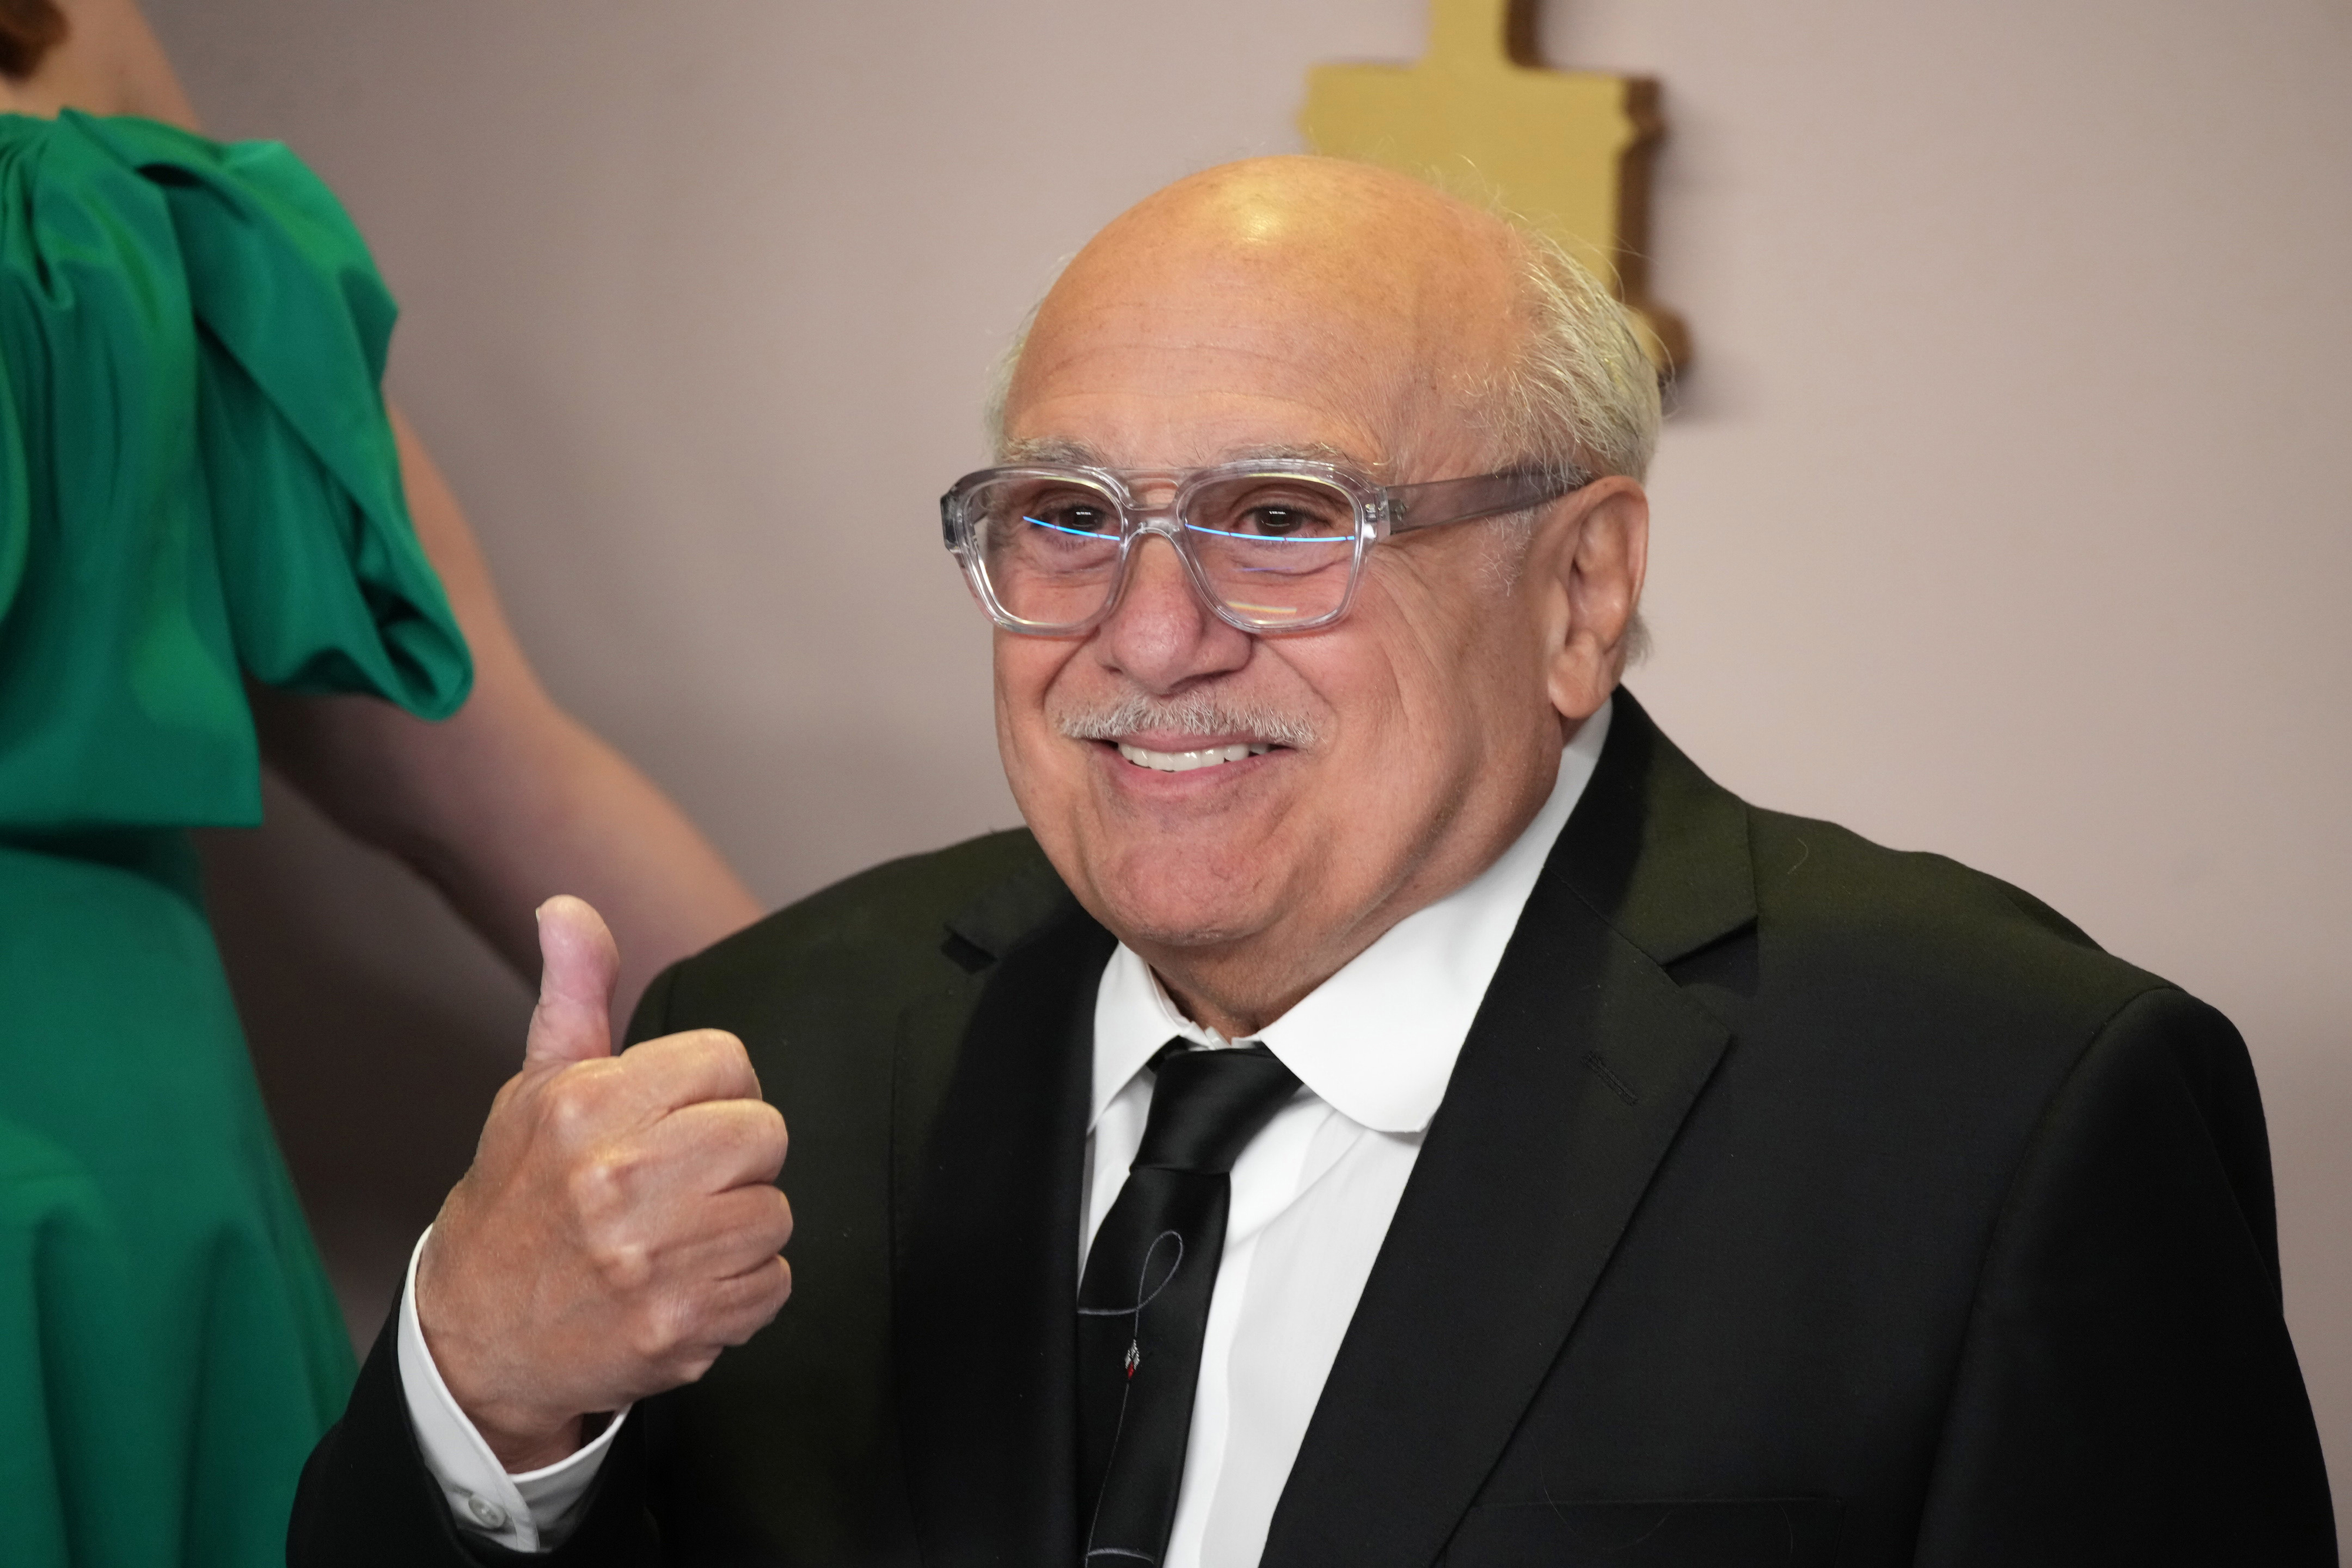 Danny DeVito in a black suit gives a thumbs up at an event